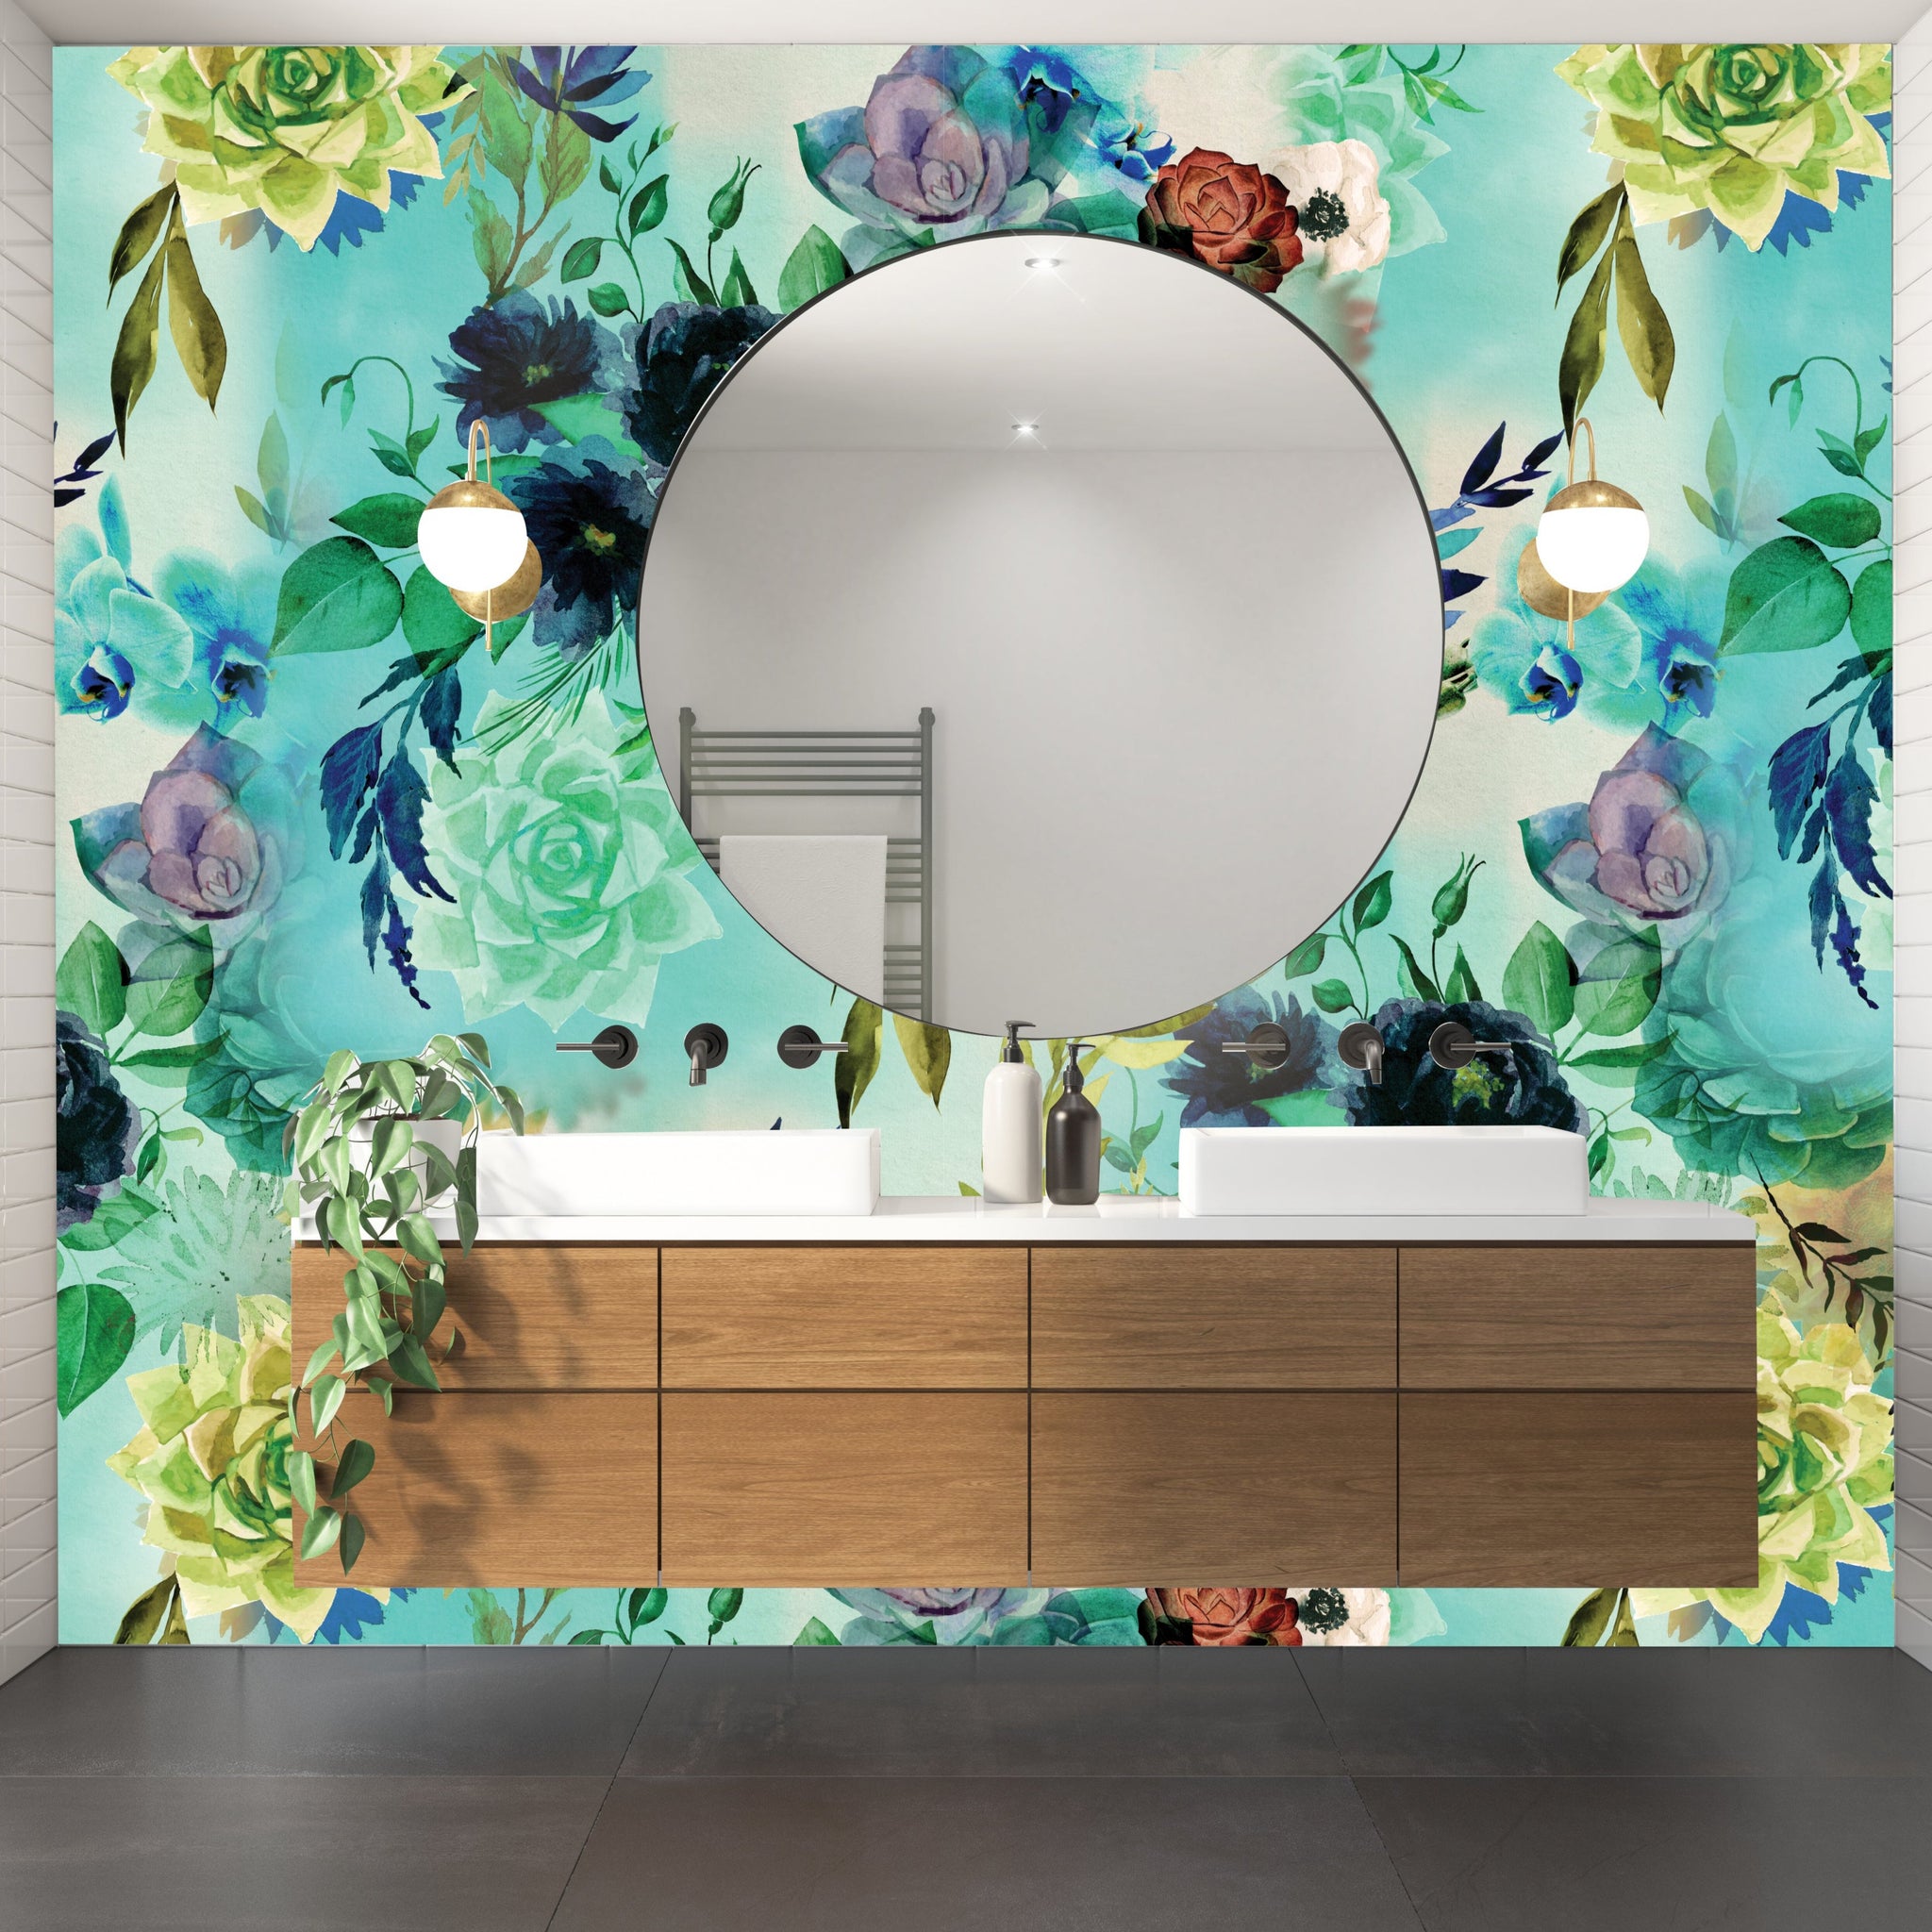 All of our wallpaper designs are now available as vinyl wallpapers for wet areas. All are printed to order here in Auckland, NZ.  130 cms in width and sold by the lineal metre.  450 gsm in weight